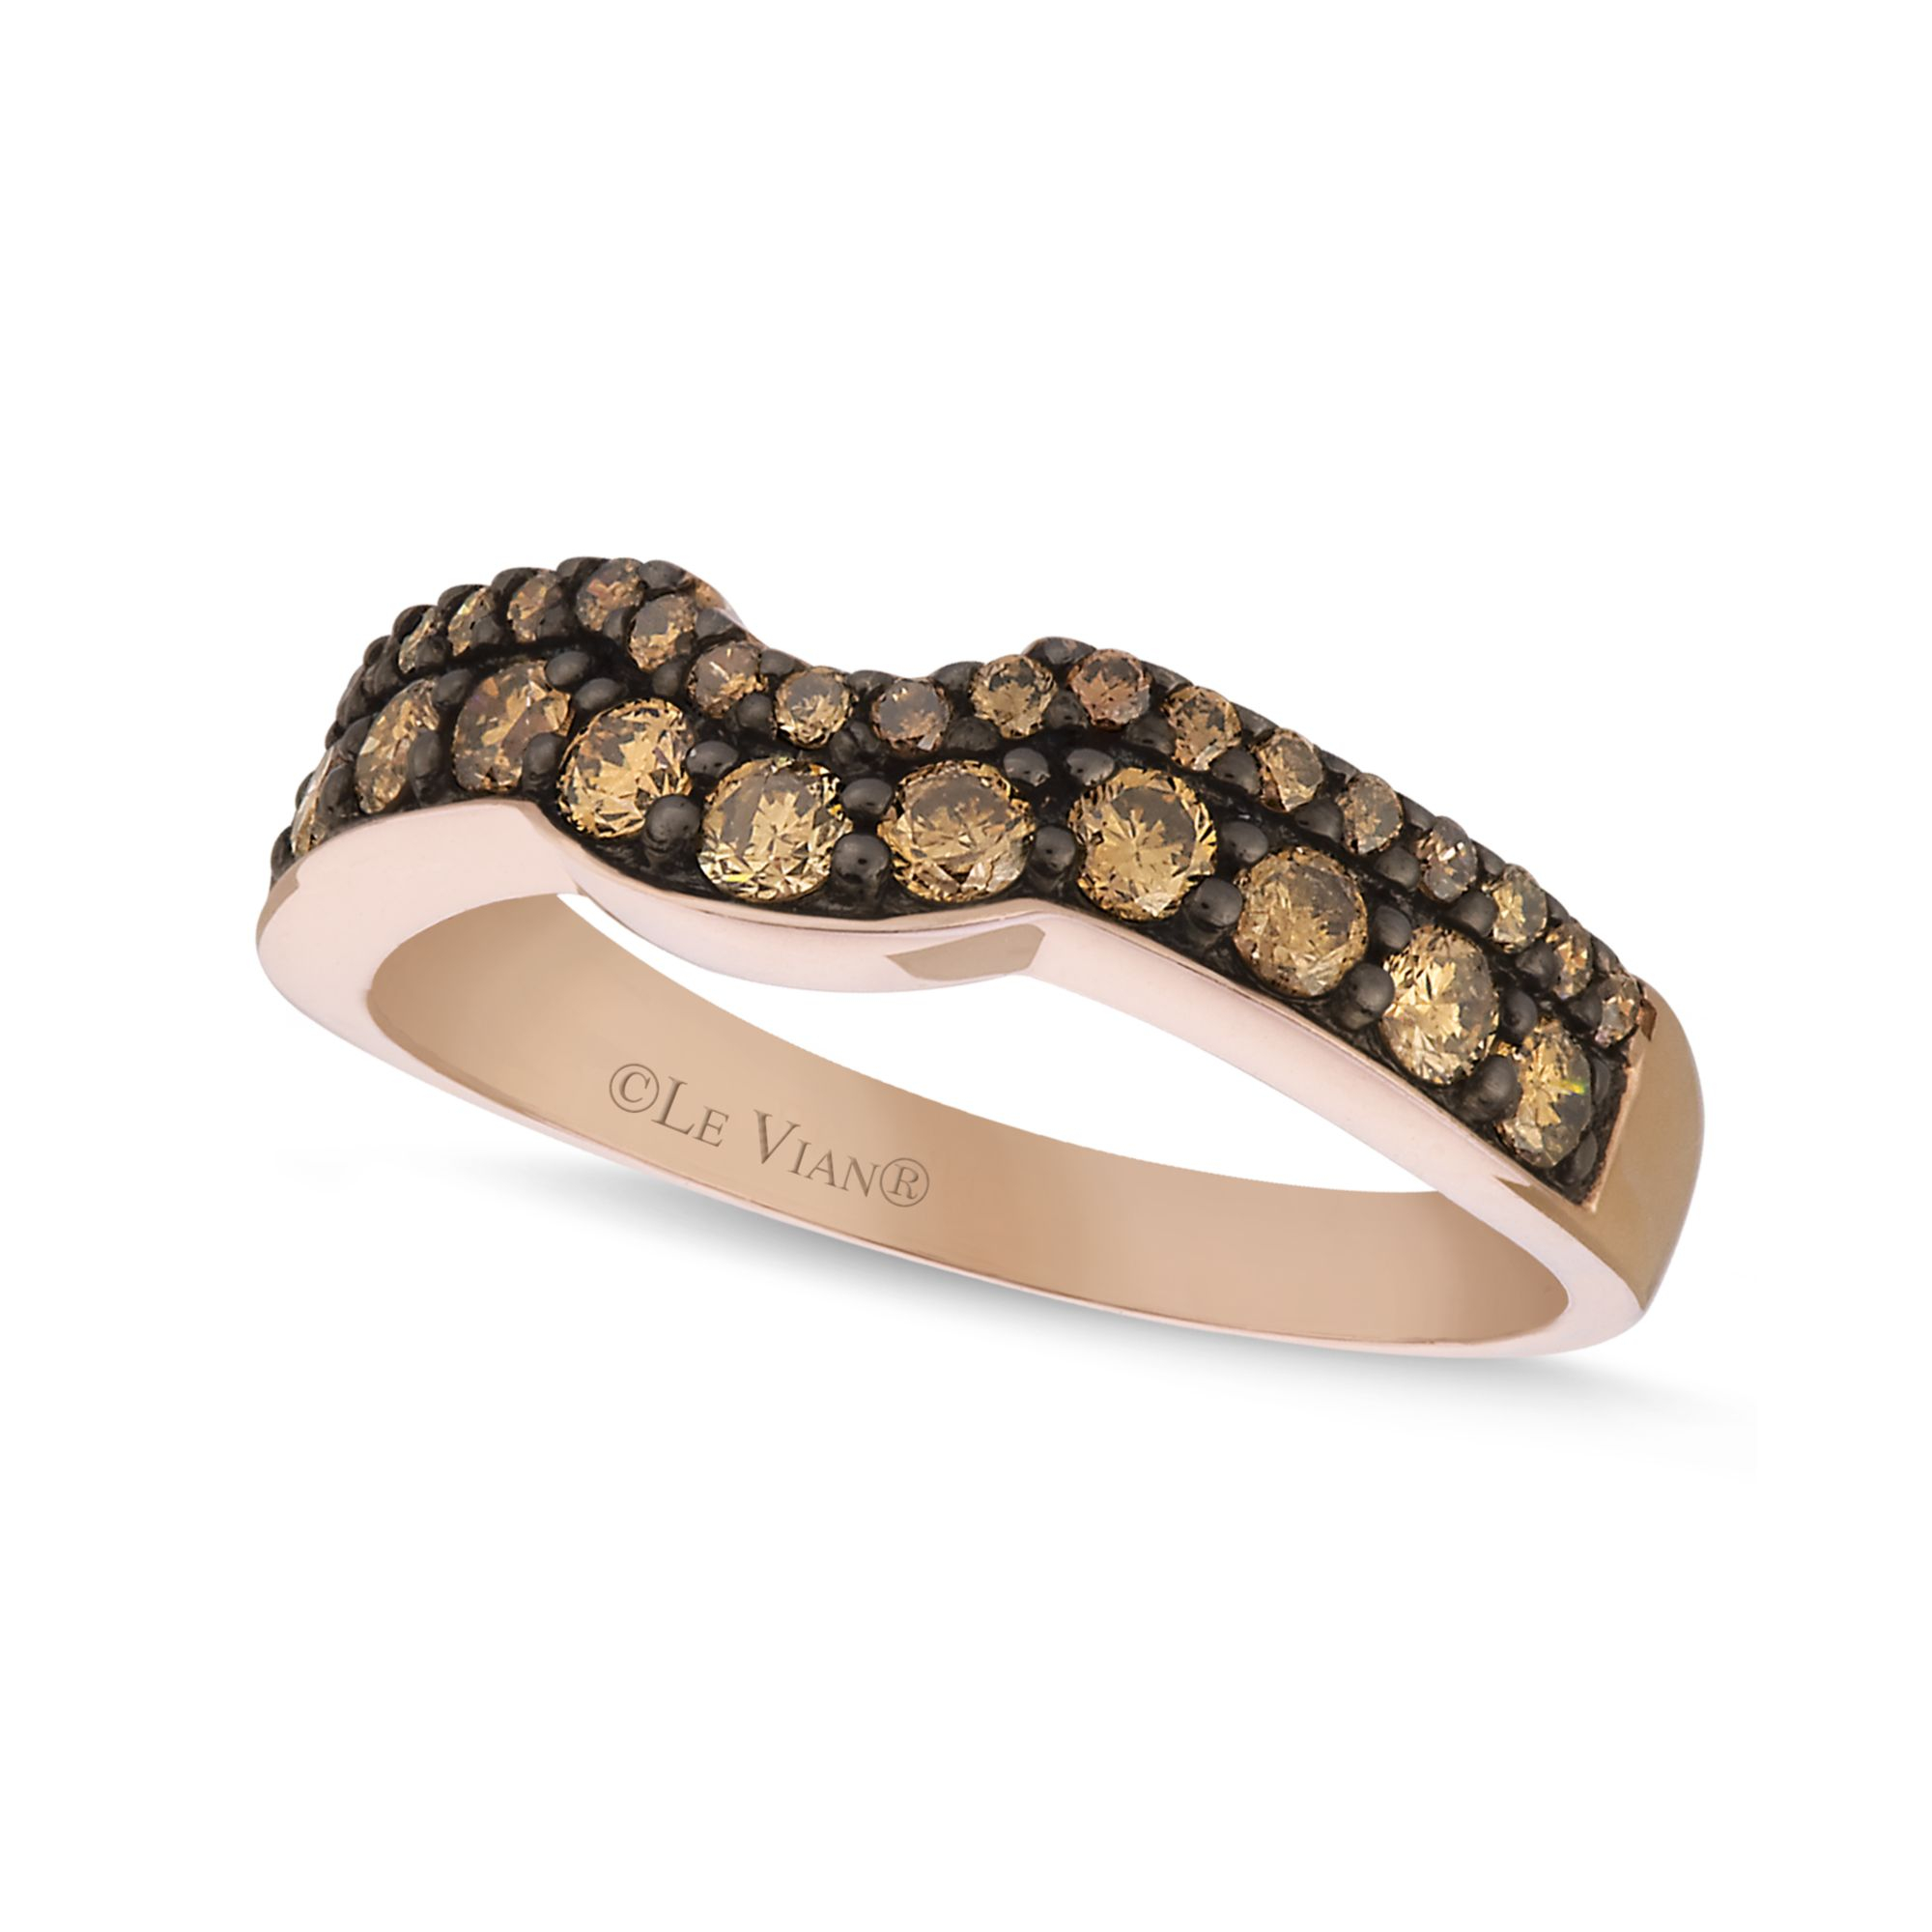 Le Vian Pink 14k Rose Gold Chocolate Diamond Wedding Band 58 Ct Tw Product 1 17194661 0 865245977 Normal 